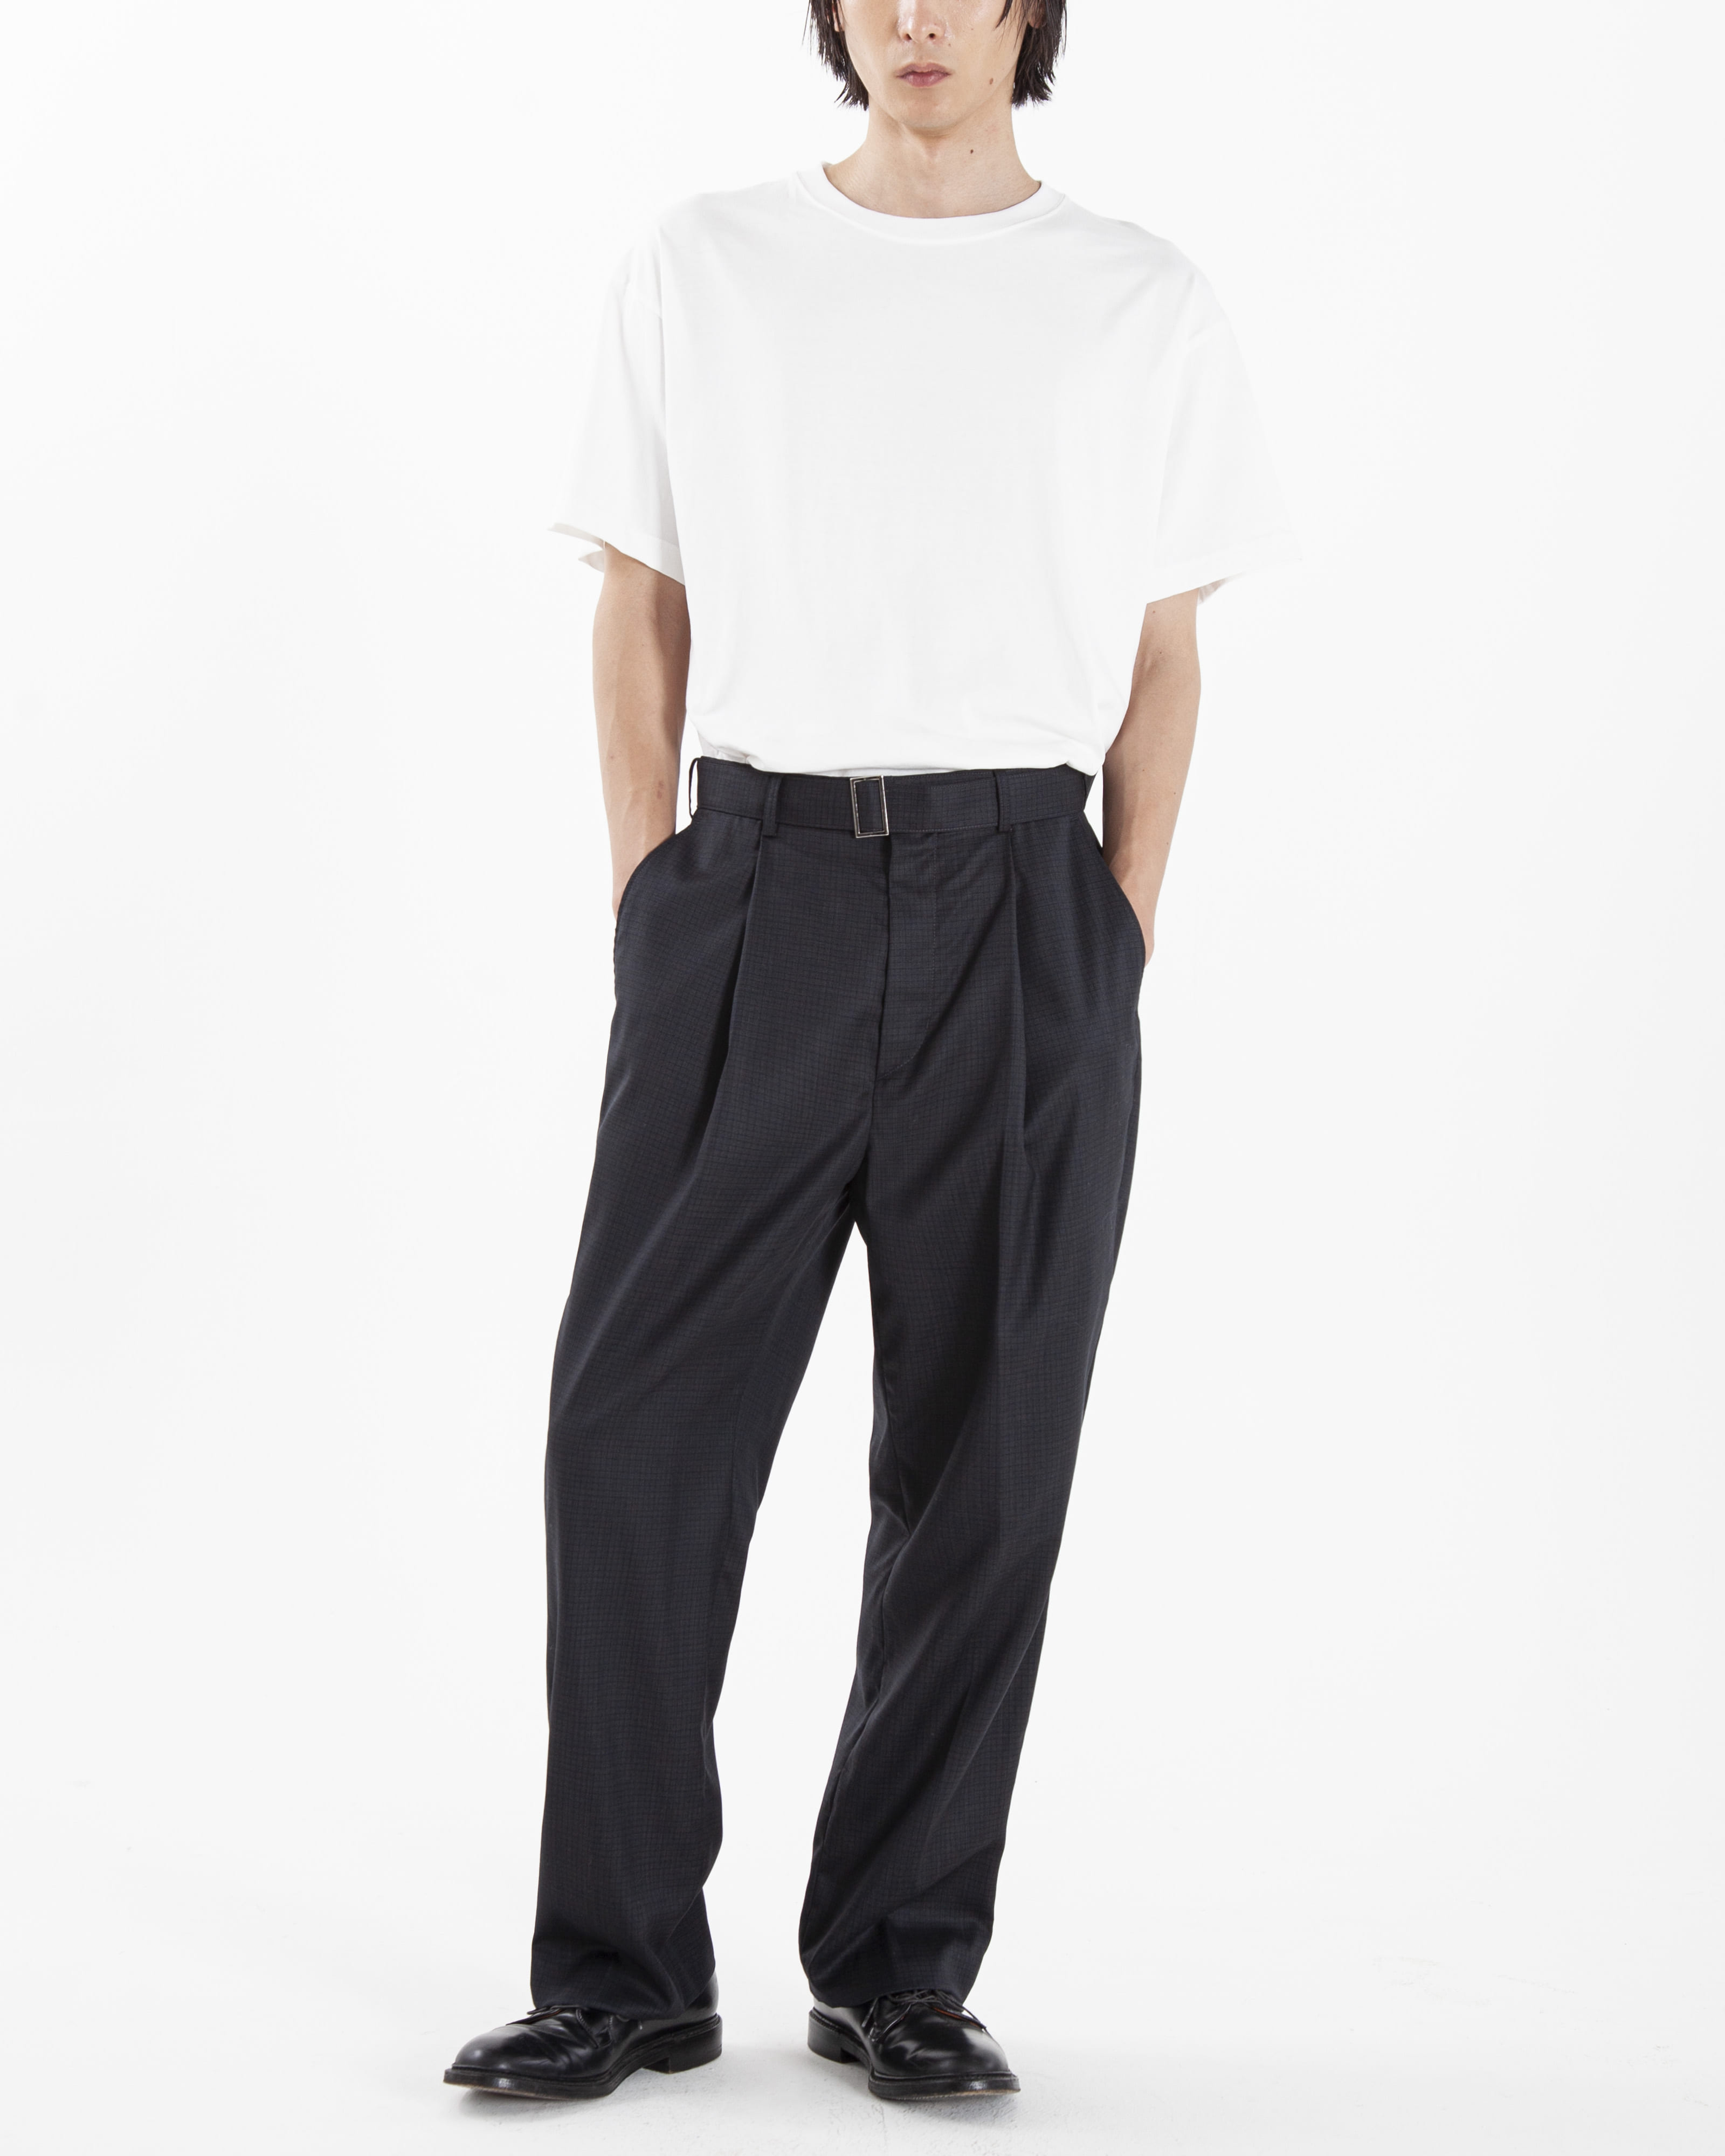 IVY TROUSER GRID CHECK